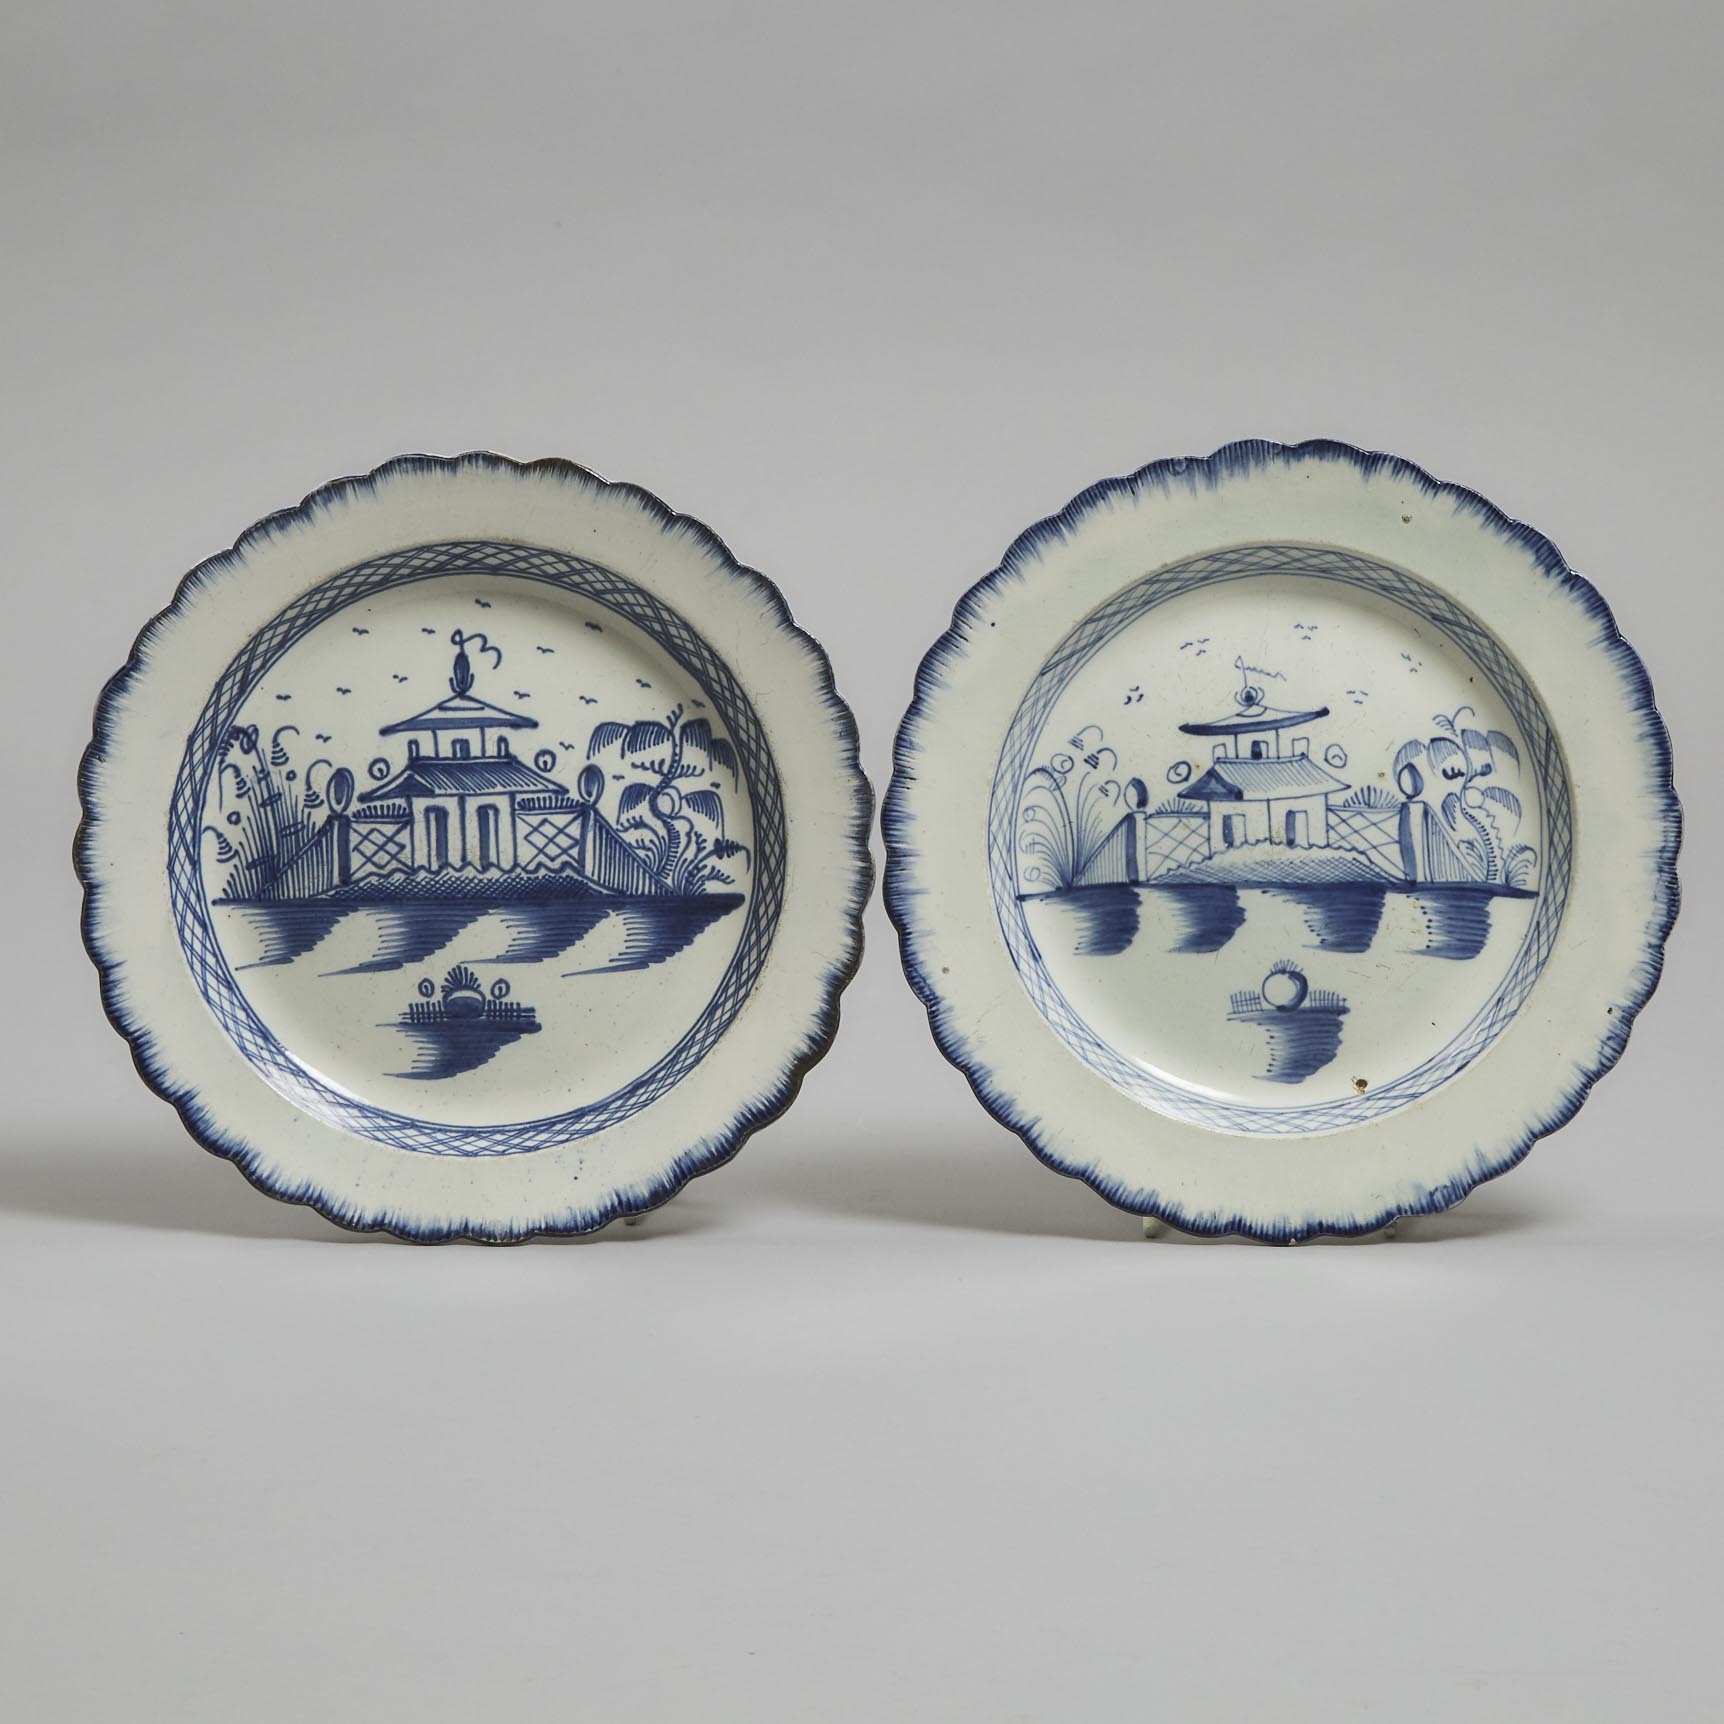 Two English Blue Painted Pearlware Plates, c.1780